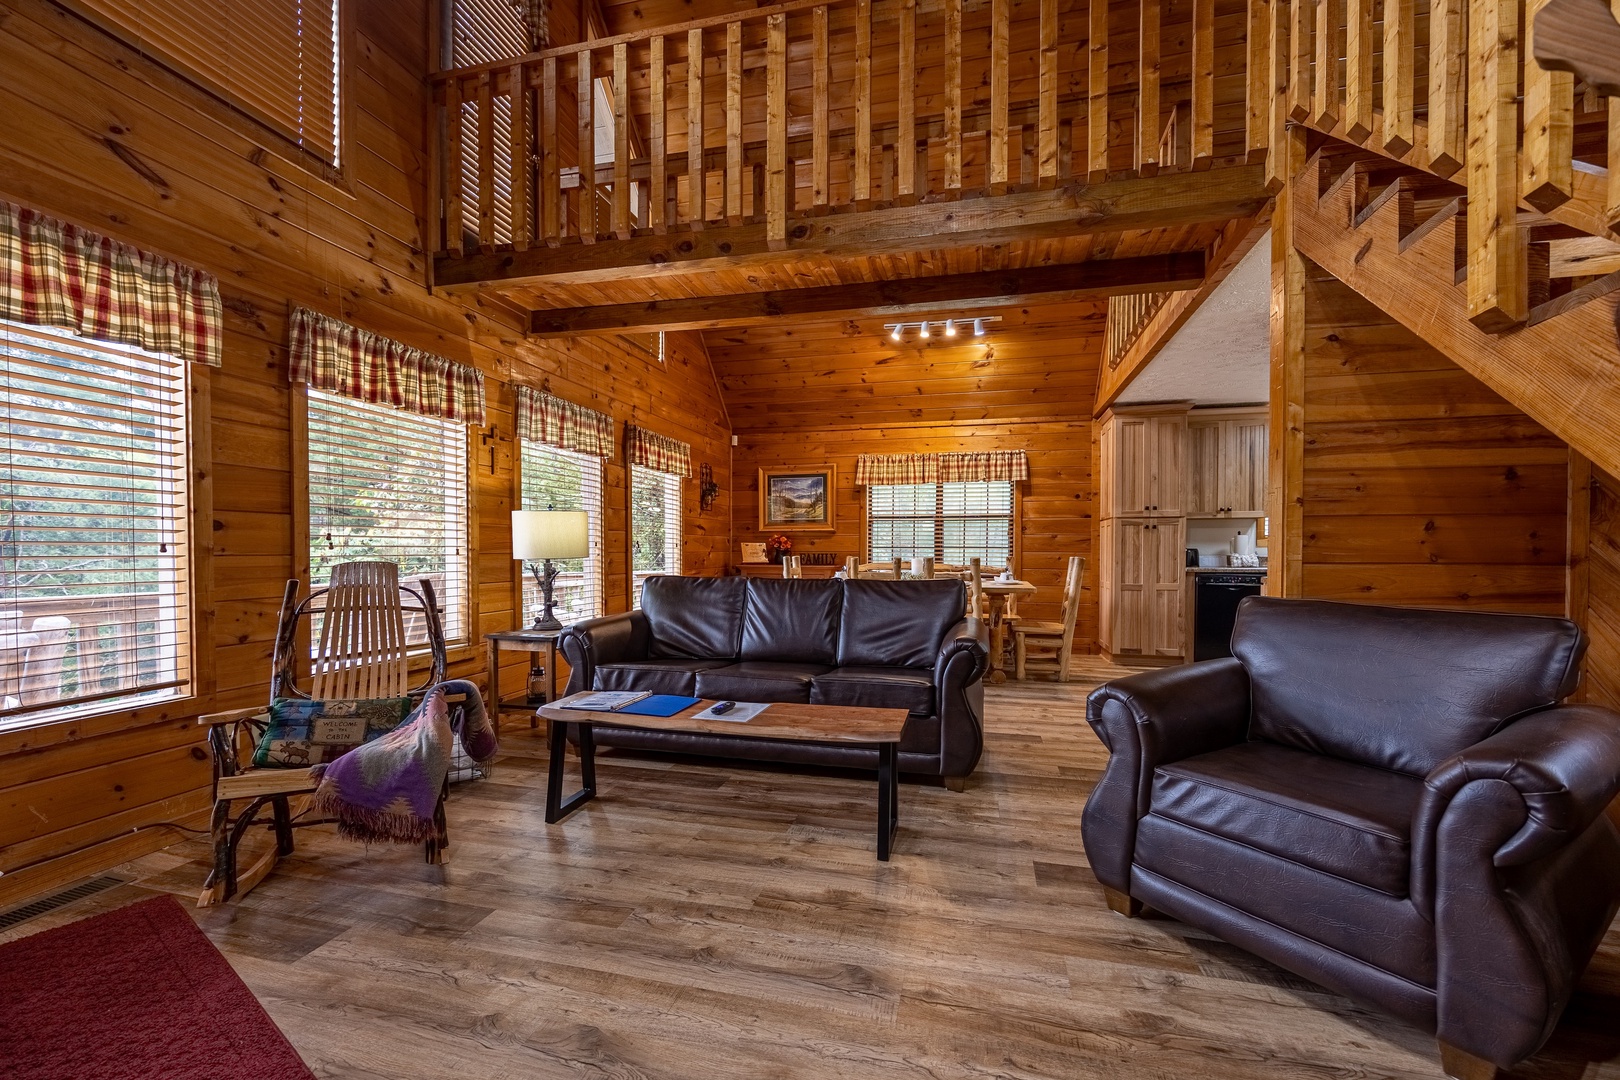 Livingroom seating at Cabin On The Hill, a 1 bedroom cabin rental located in Pigeon Forge